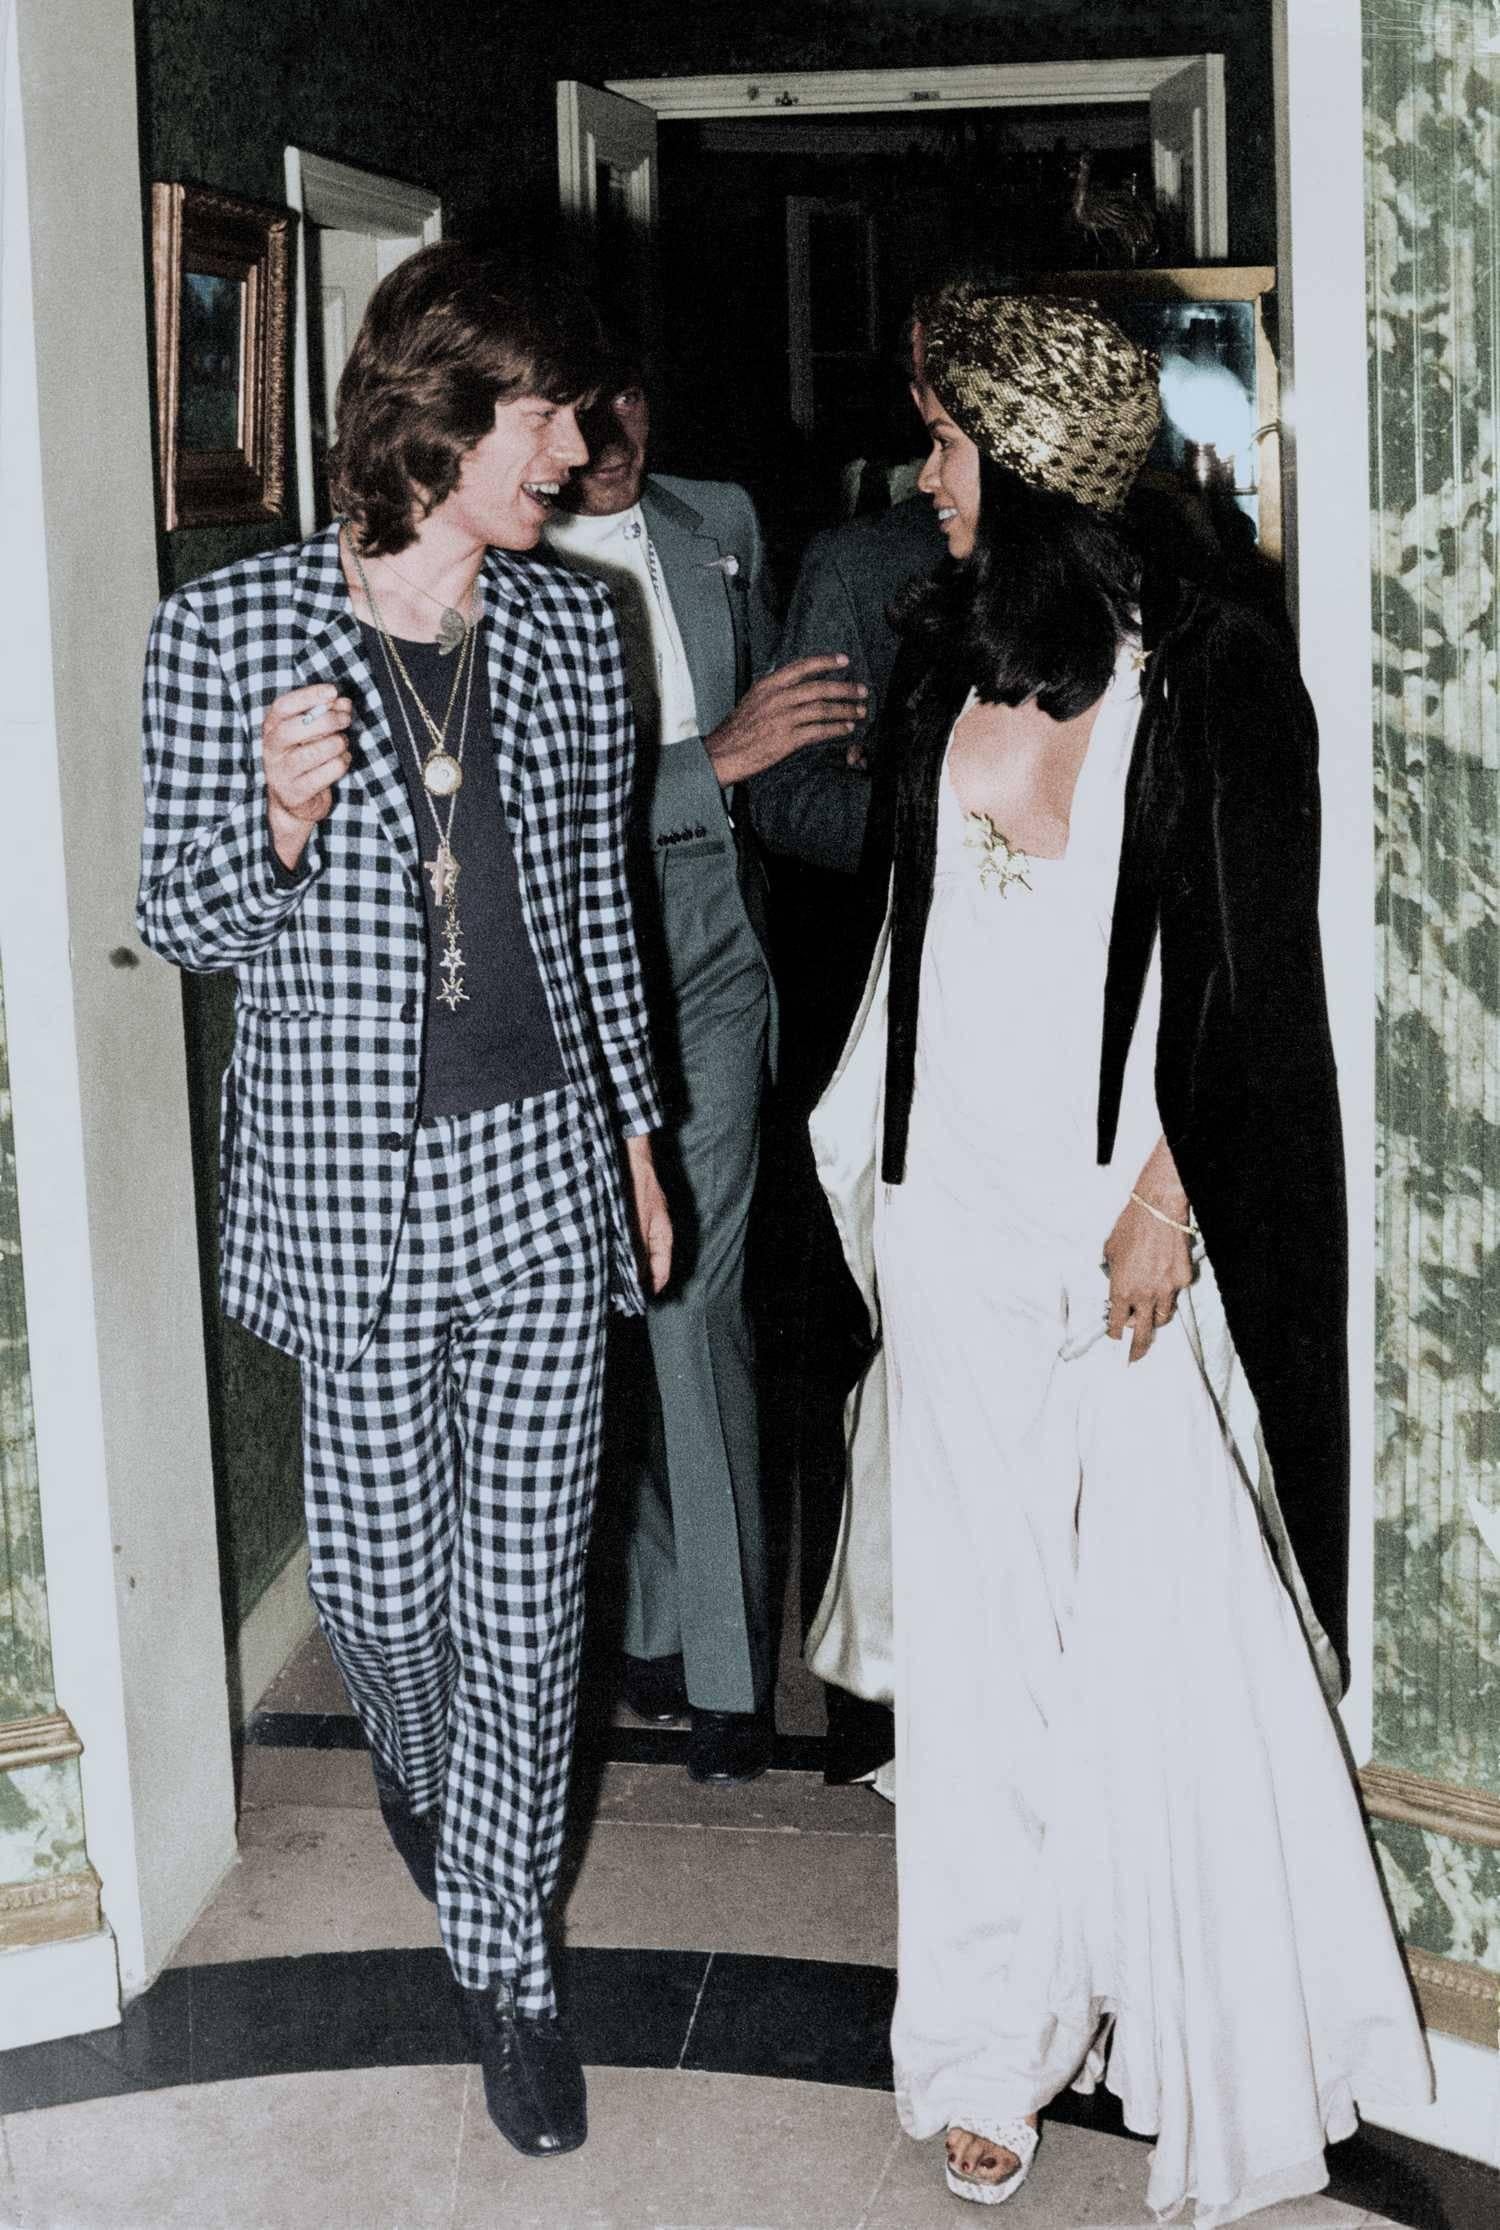 Unknown Color Photograph - Mick Jagger and Bianca Jagger - Colorized Fine Art Print